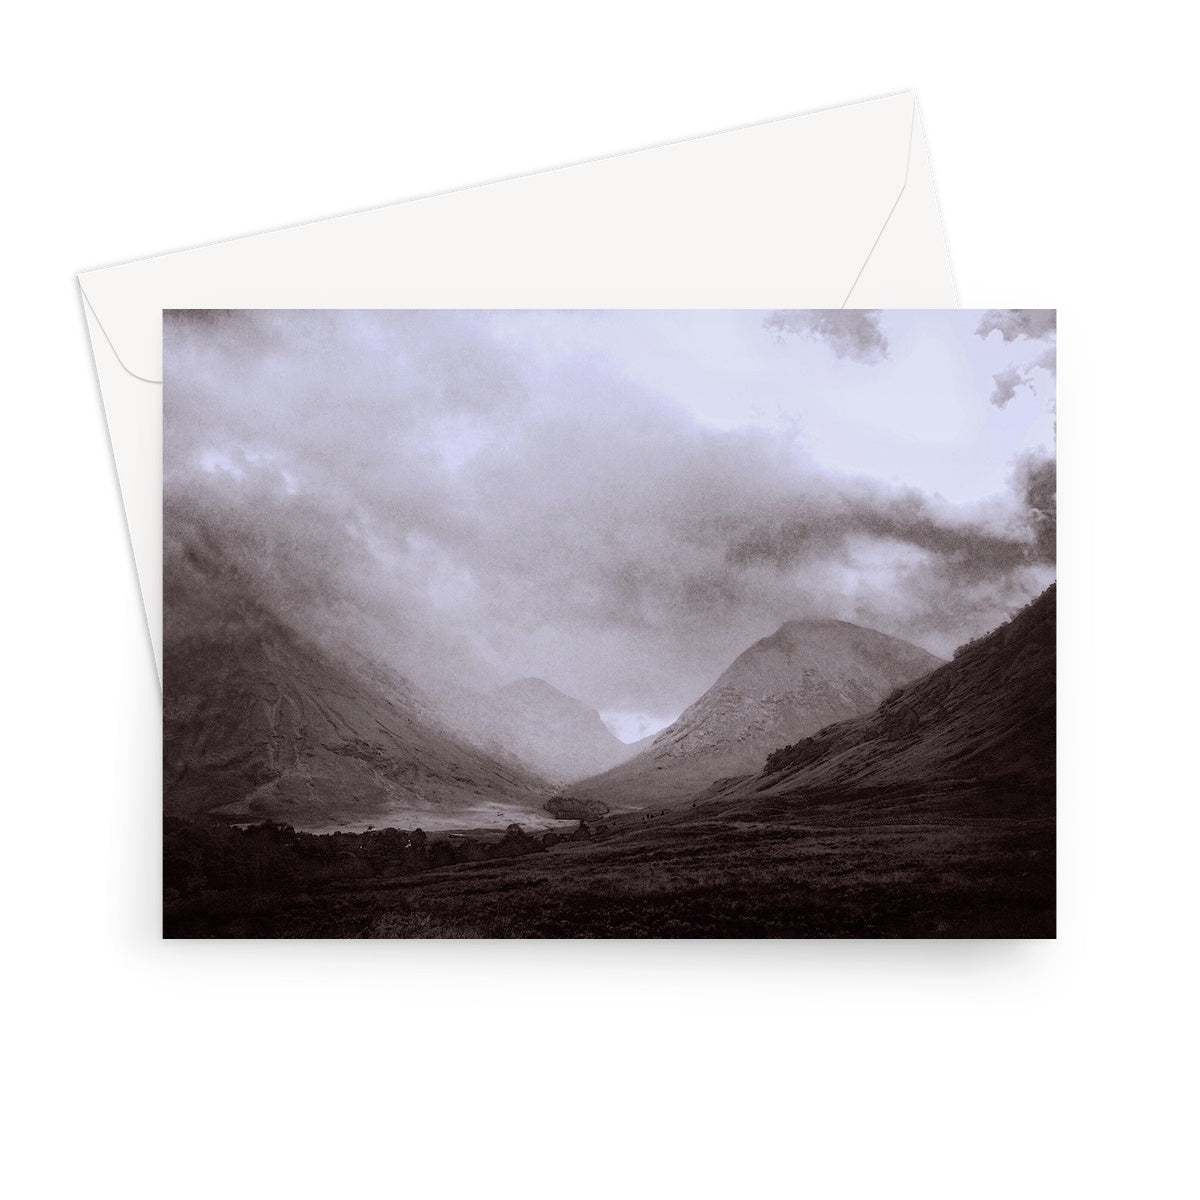 Glencoe Mist Art Gifts Greeting Card-Greetings Cards-Glencoe Art Gallery-7"x5"-1 Card-Paintings, Prints, Homeware, Art Gifts From Scotland By Scottish Artist Kevin Hunter